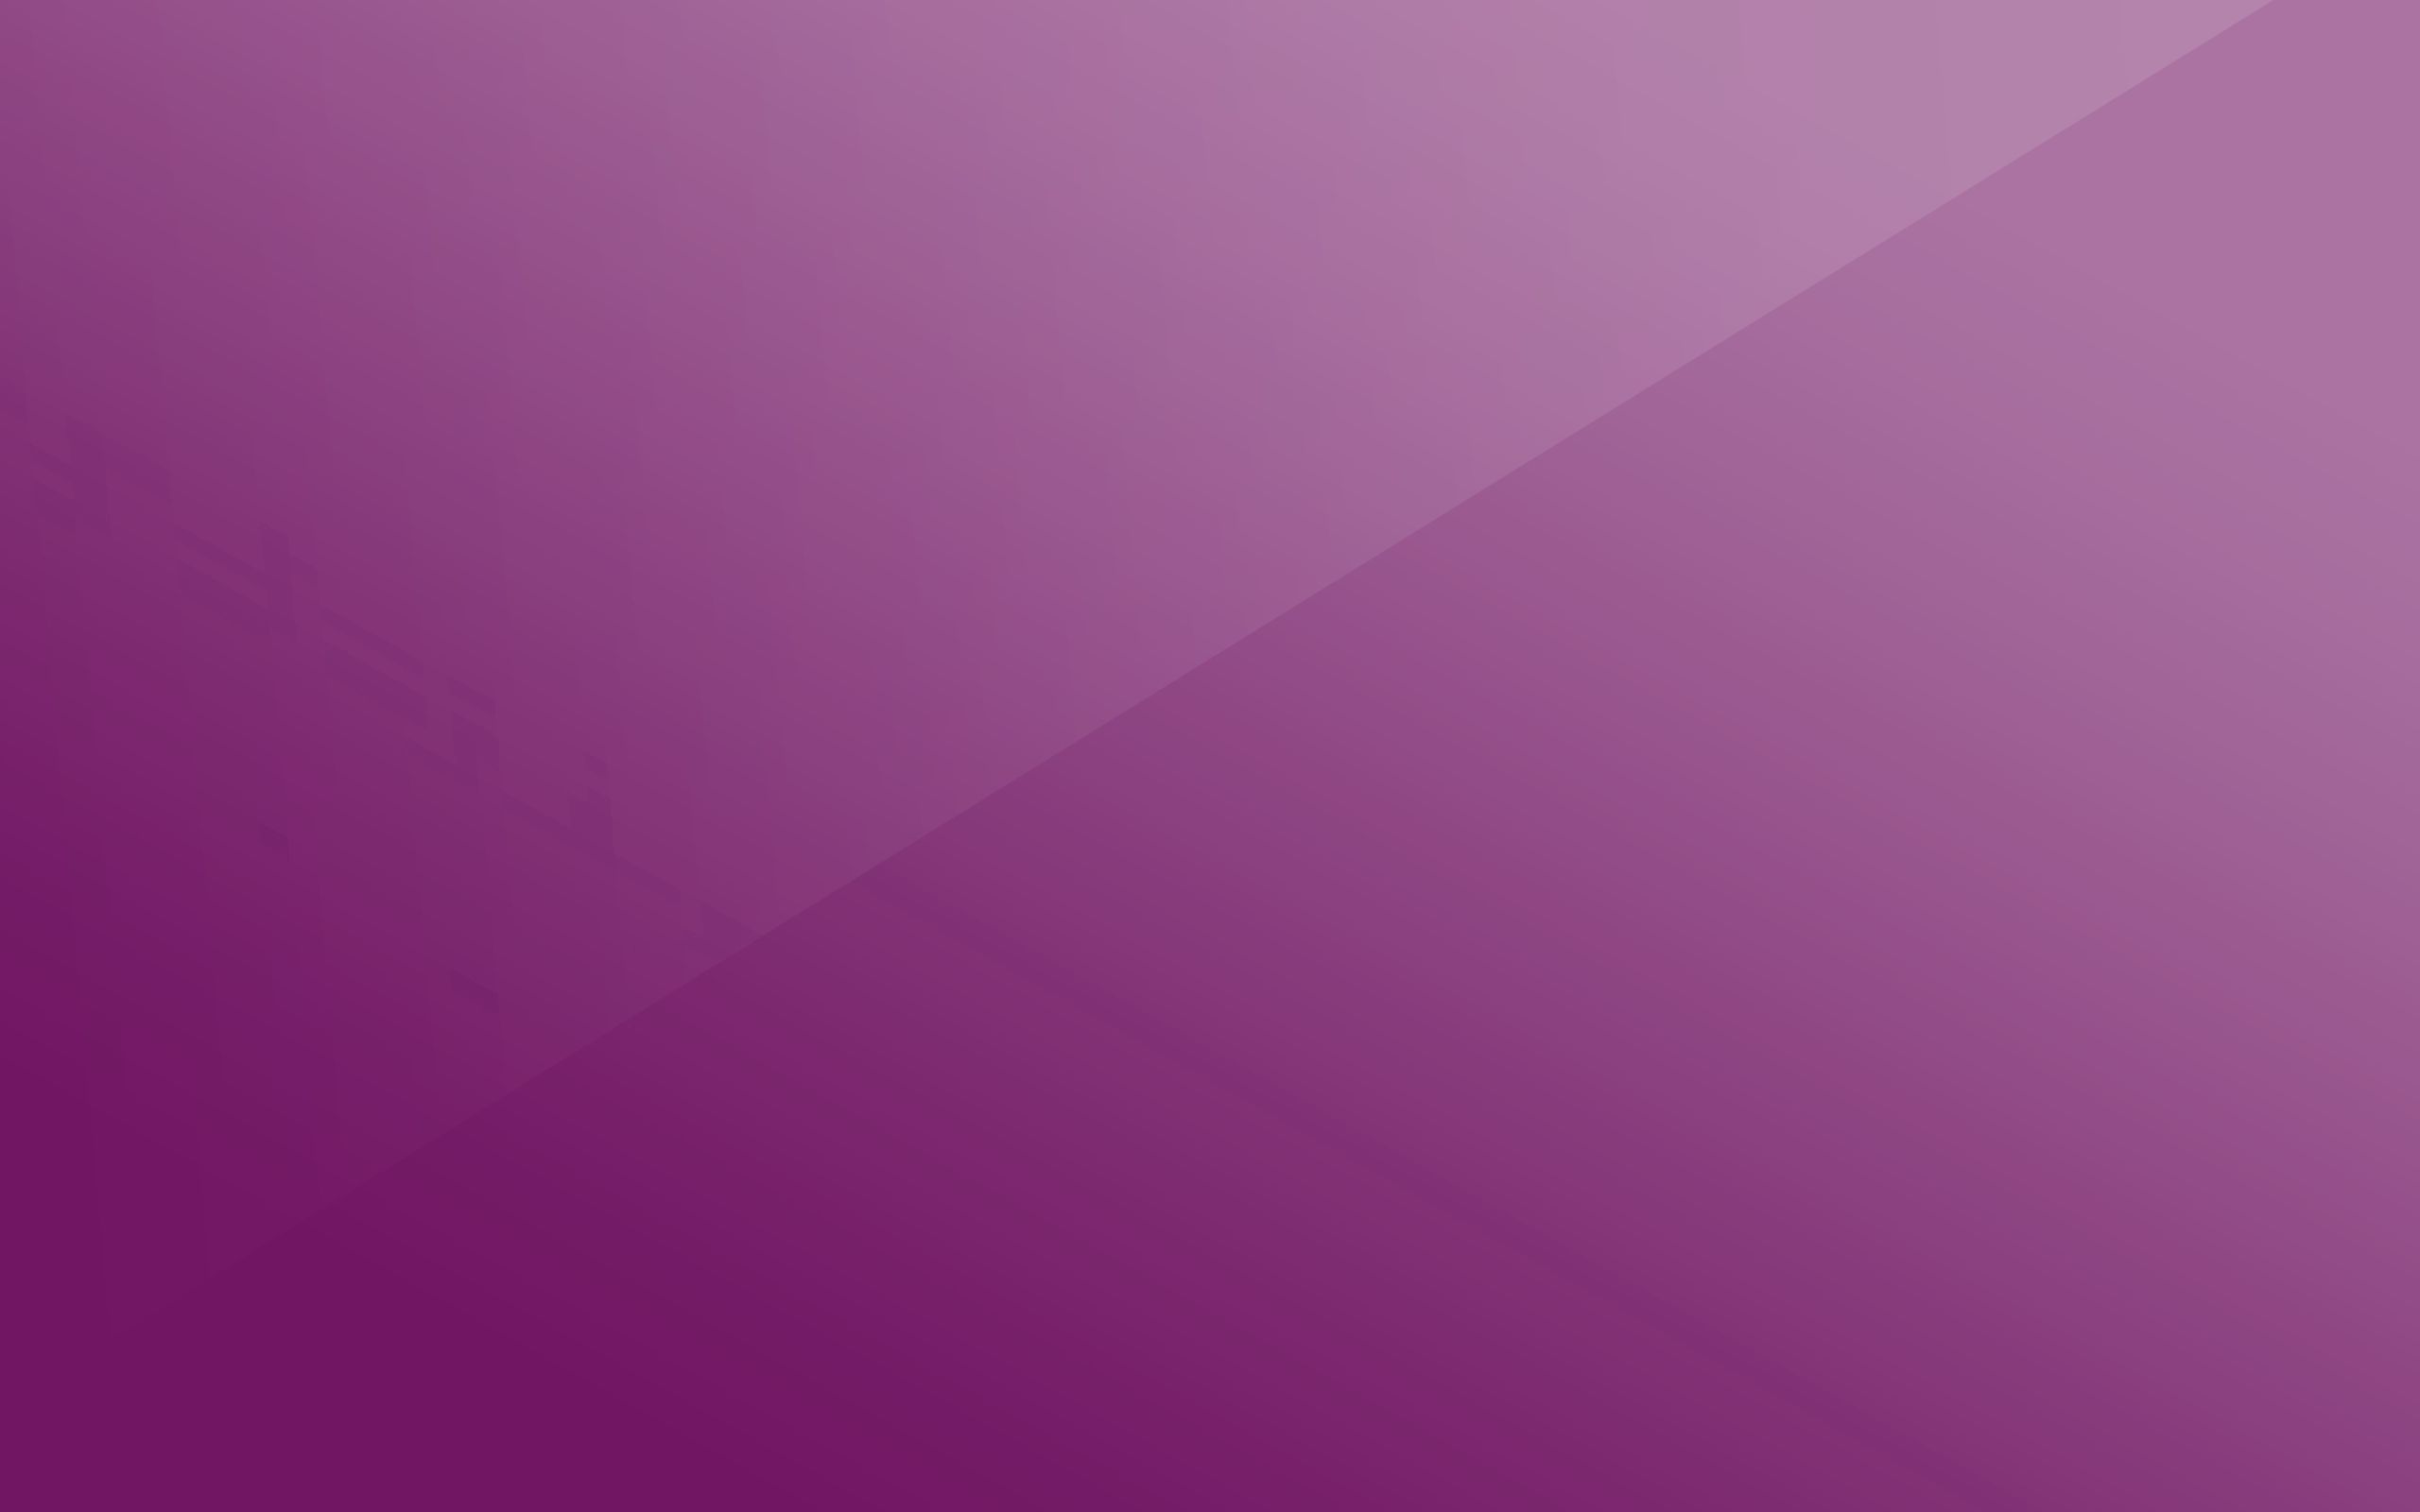 purple, light coloured, surface, abstract, background, violet, light, lines Full HD